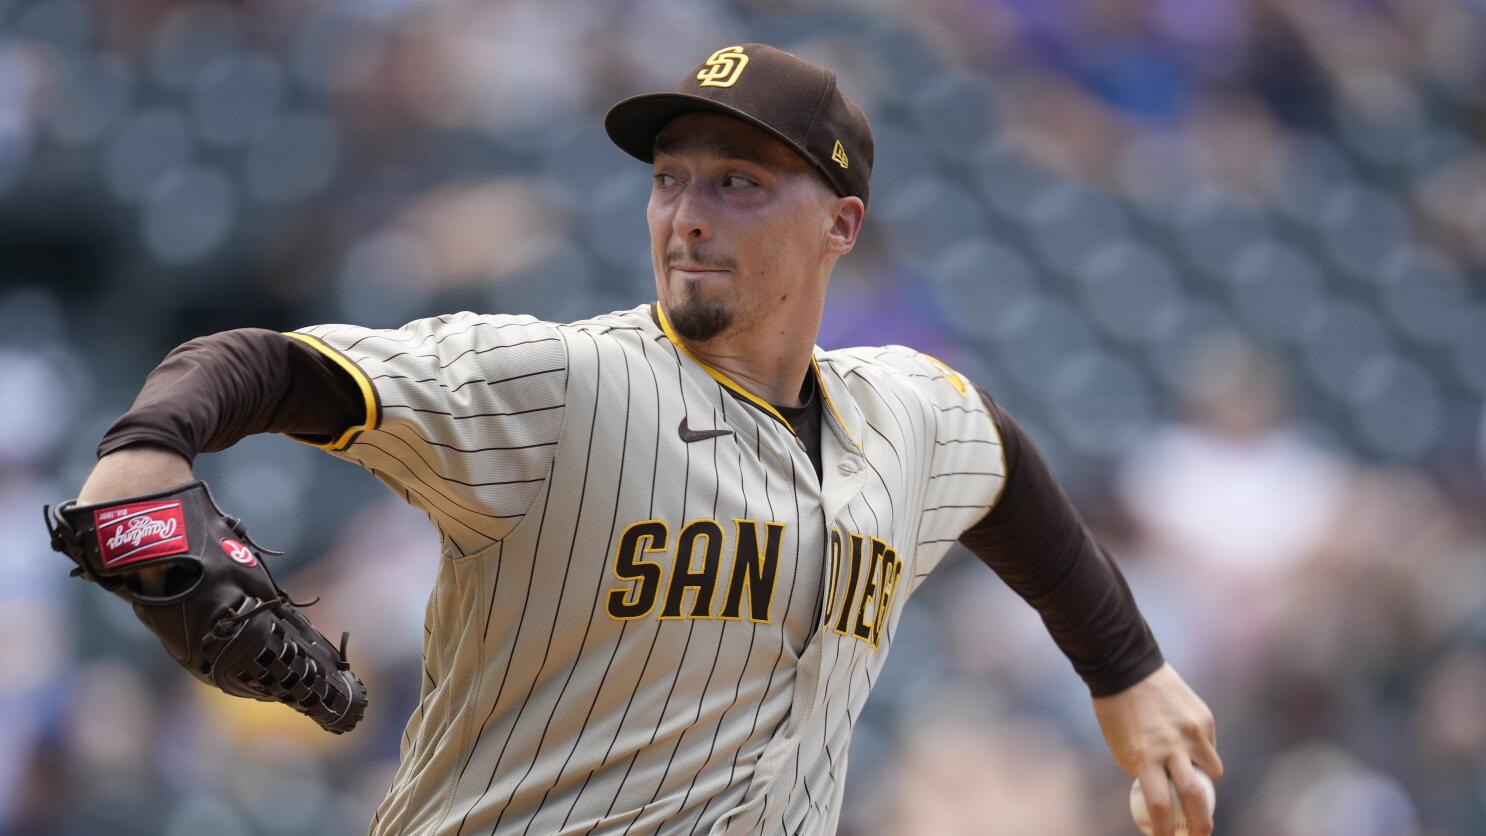 Snell pulled, San Diego's no-hit bid ends in 8th vs D-backs, WJHL